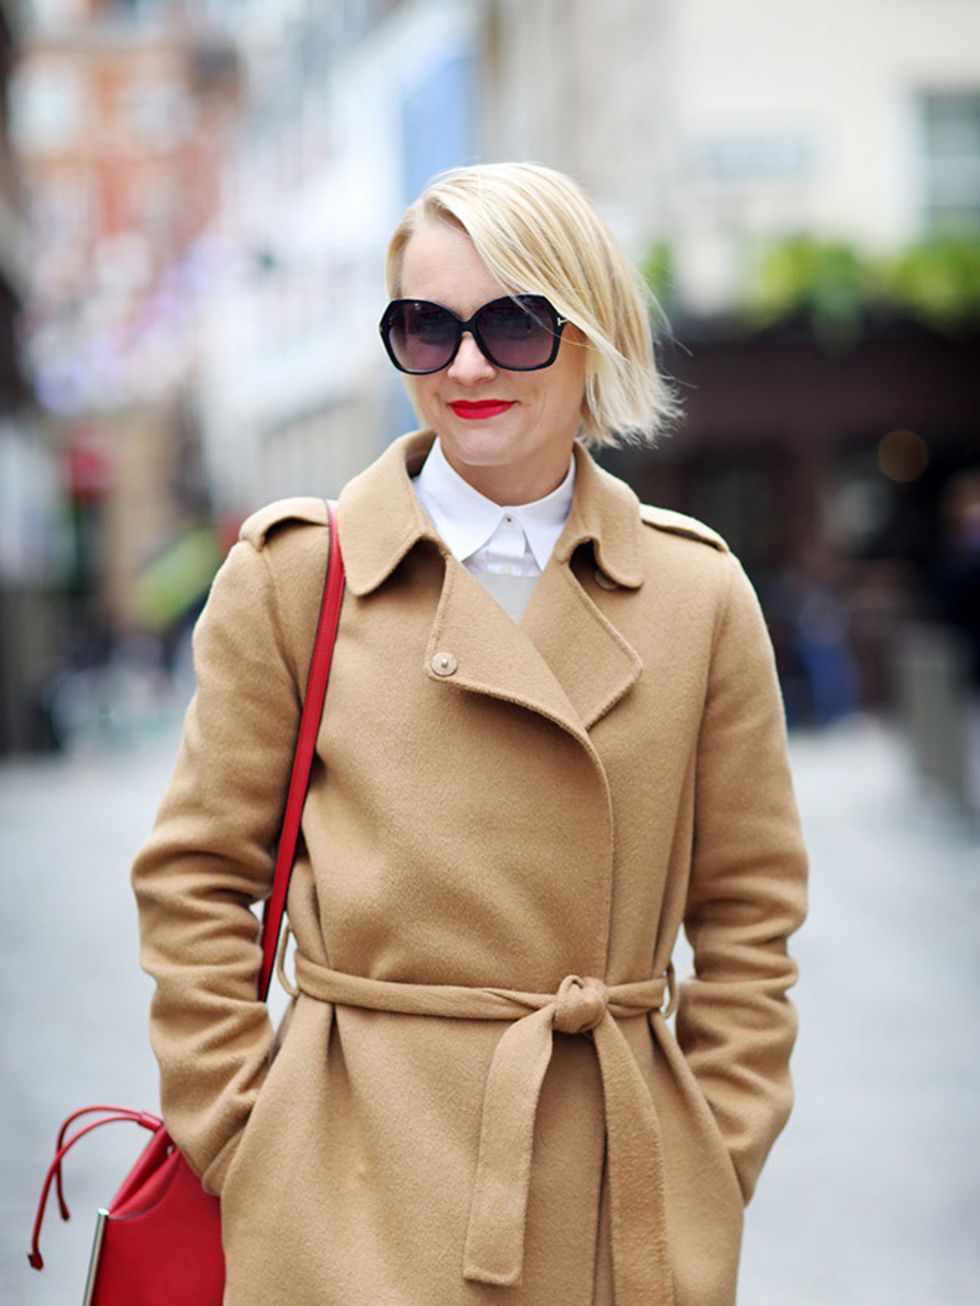 Lorraine Candy, Editor-in-Chief

Joseph coat, Carven bag and Tom Ford sunglasses.